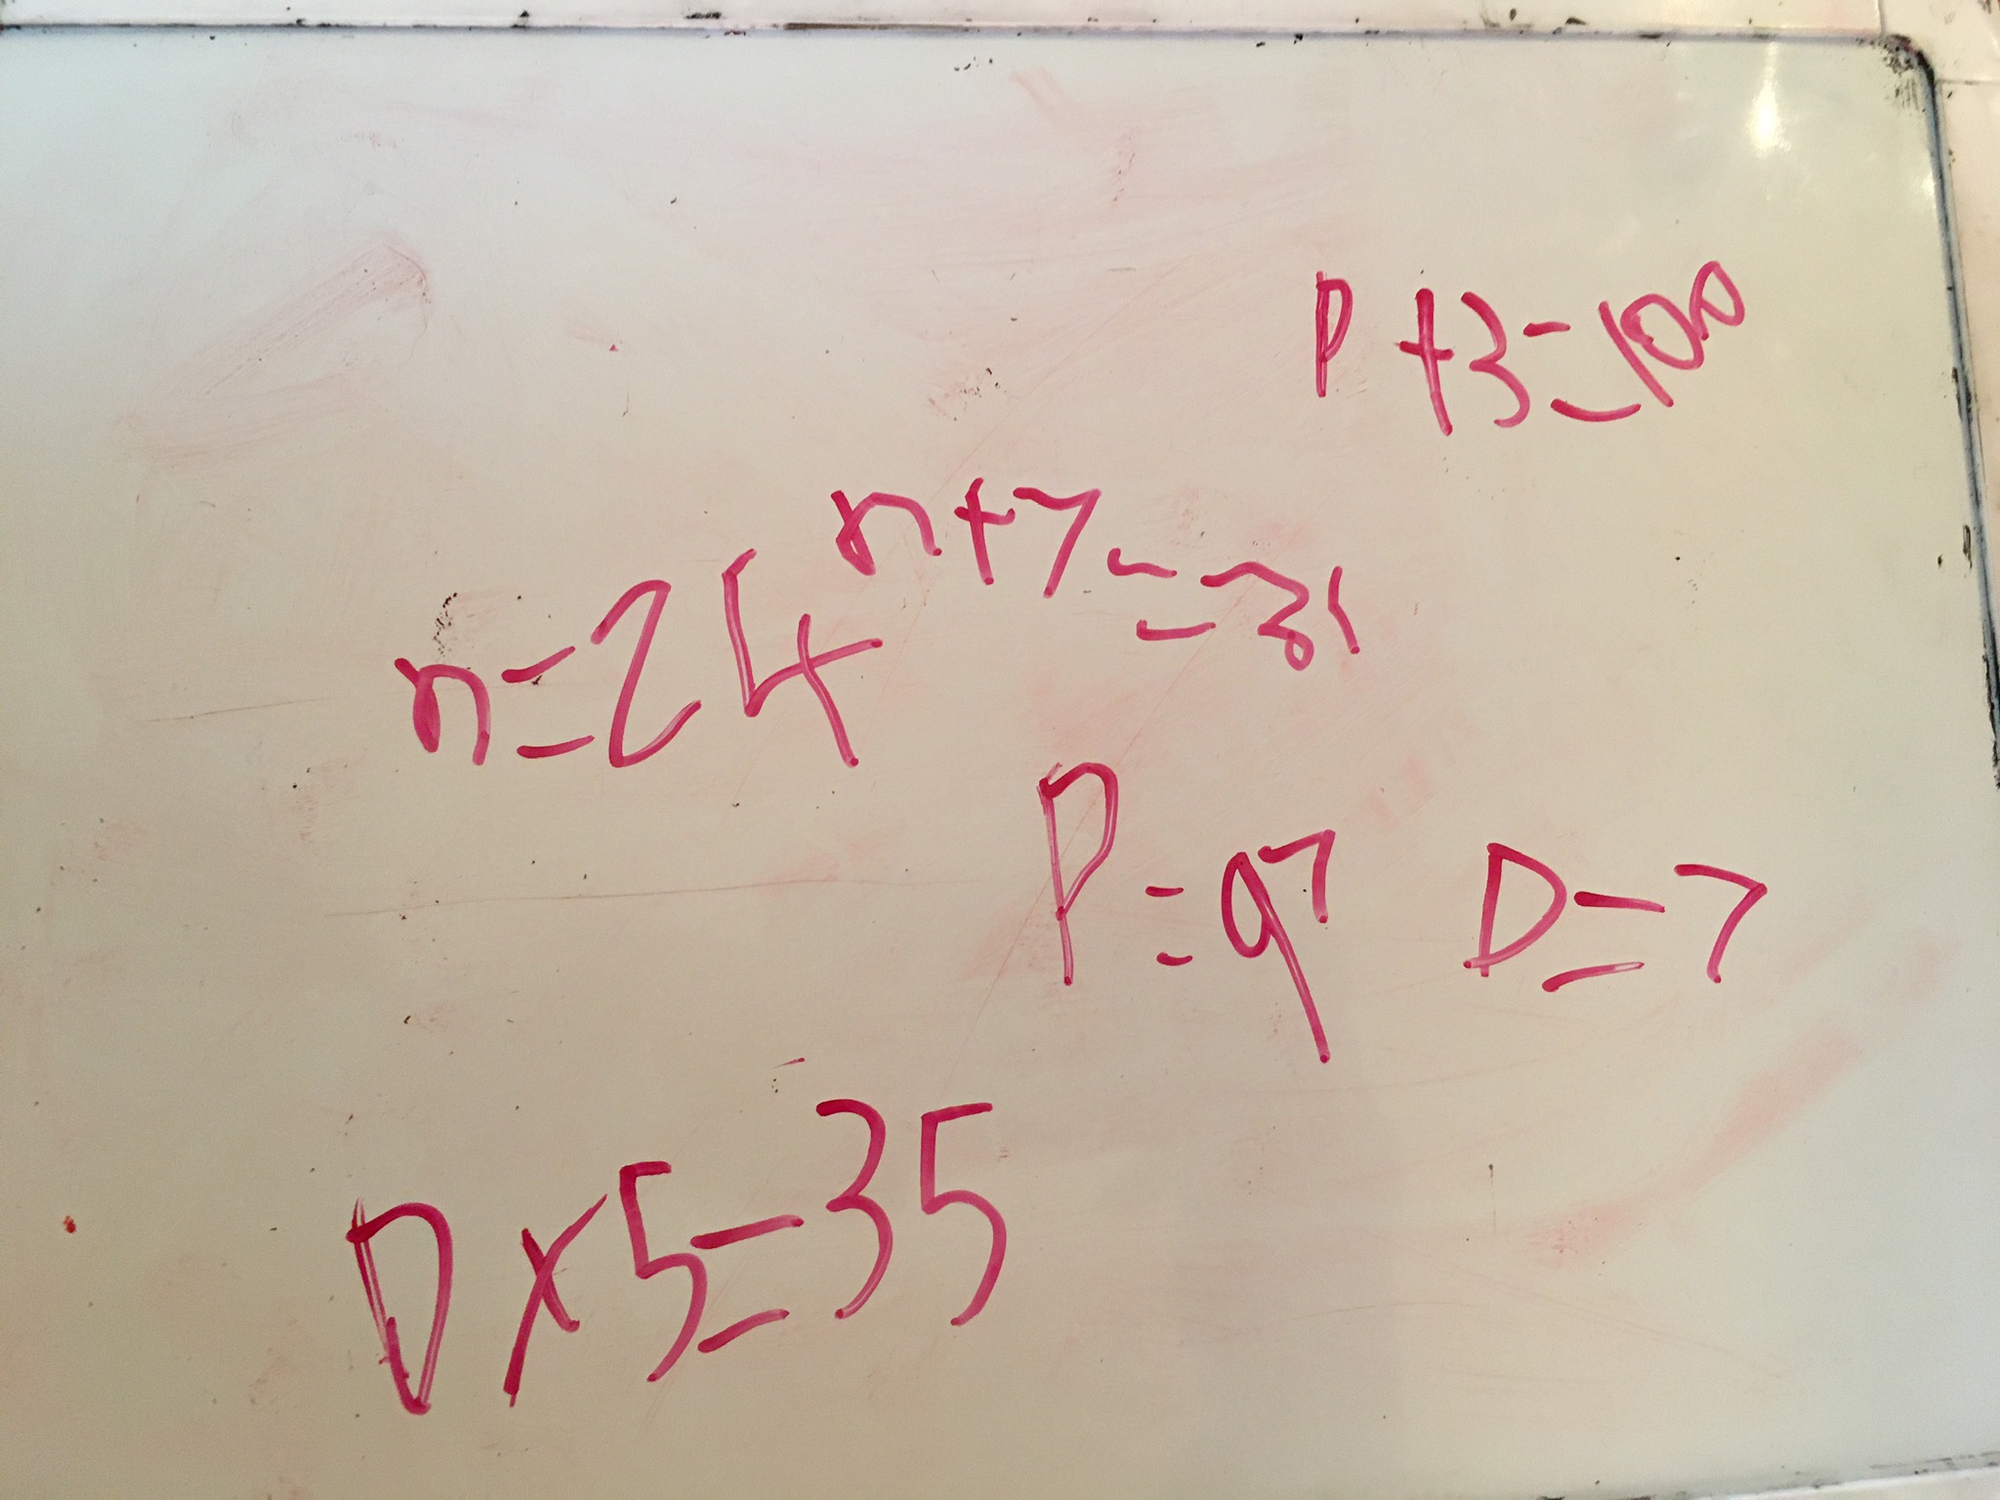 Equations written on a small white dry erase board.